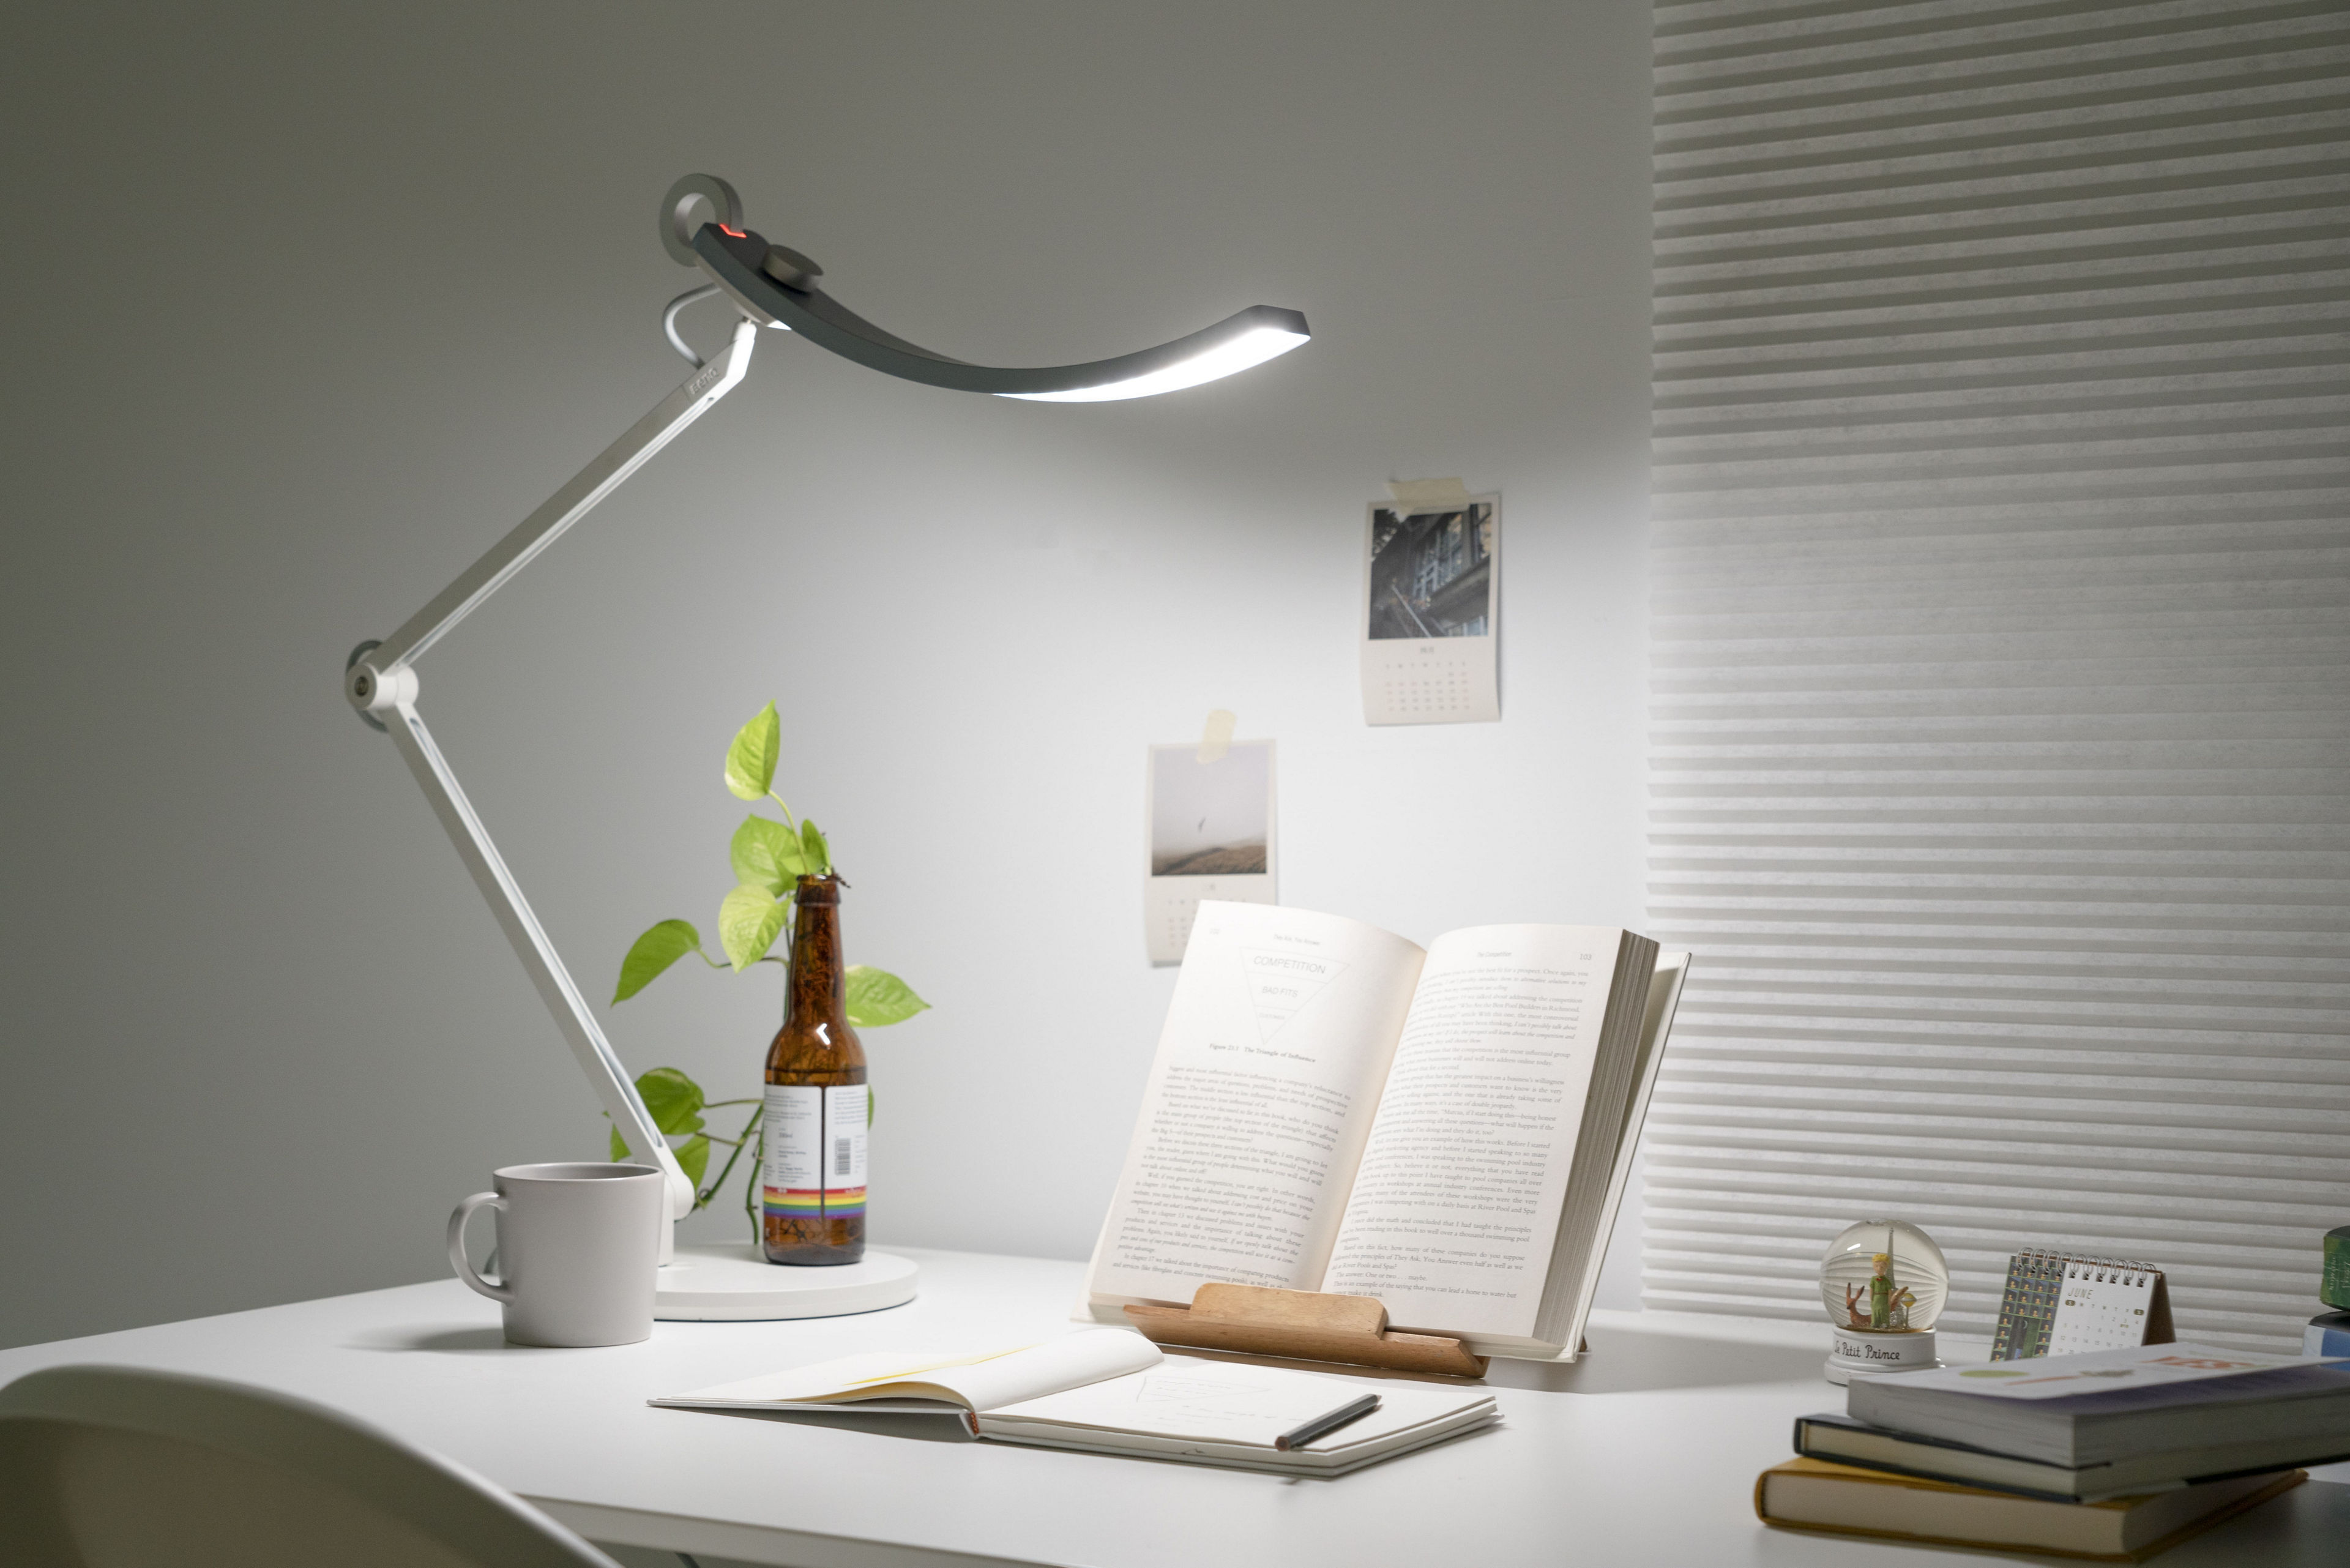 how to get the right light for sleep - comparing different light sources in  your home